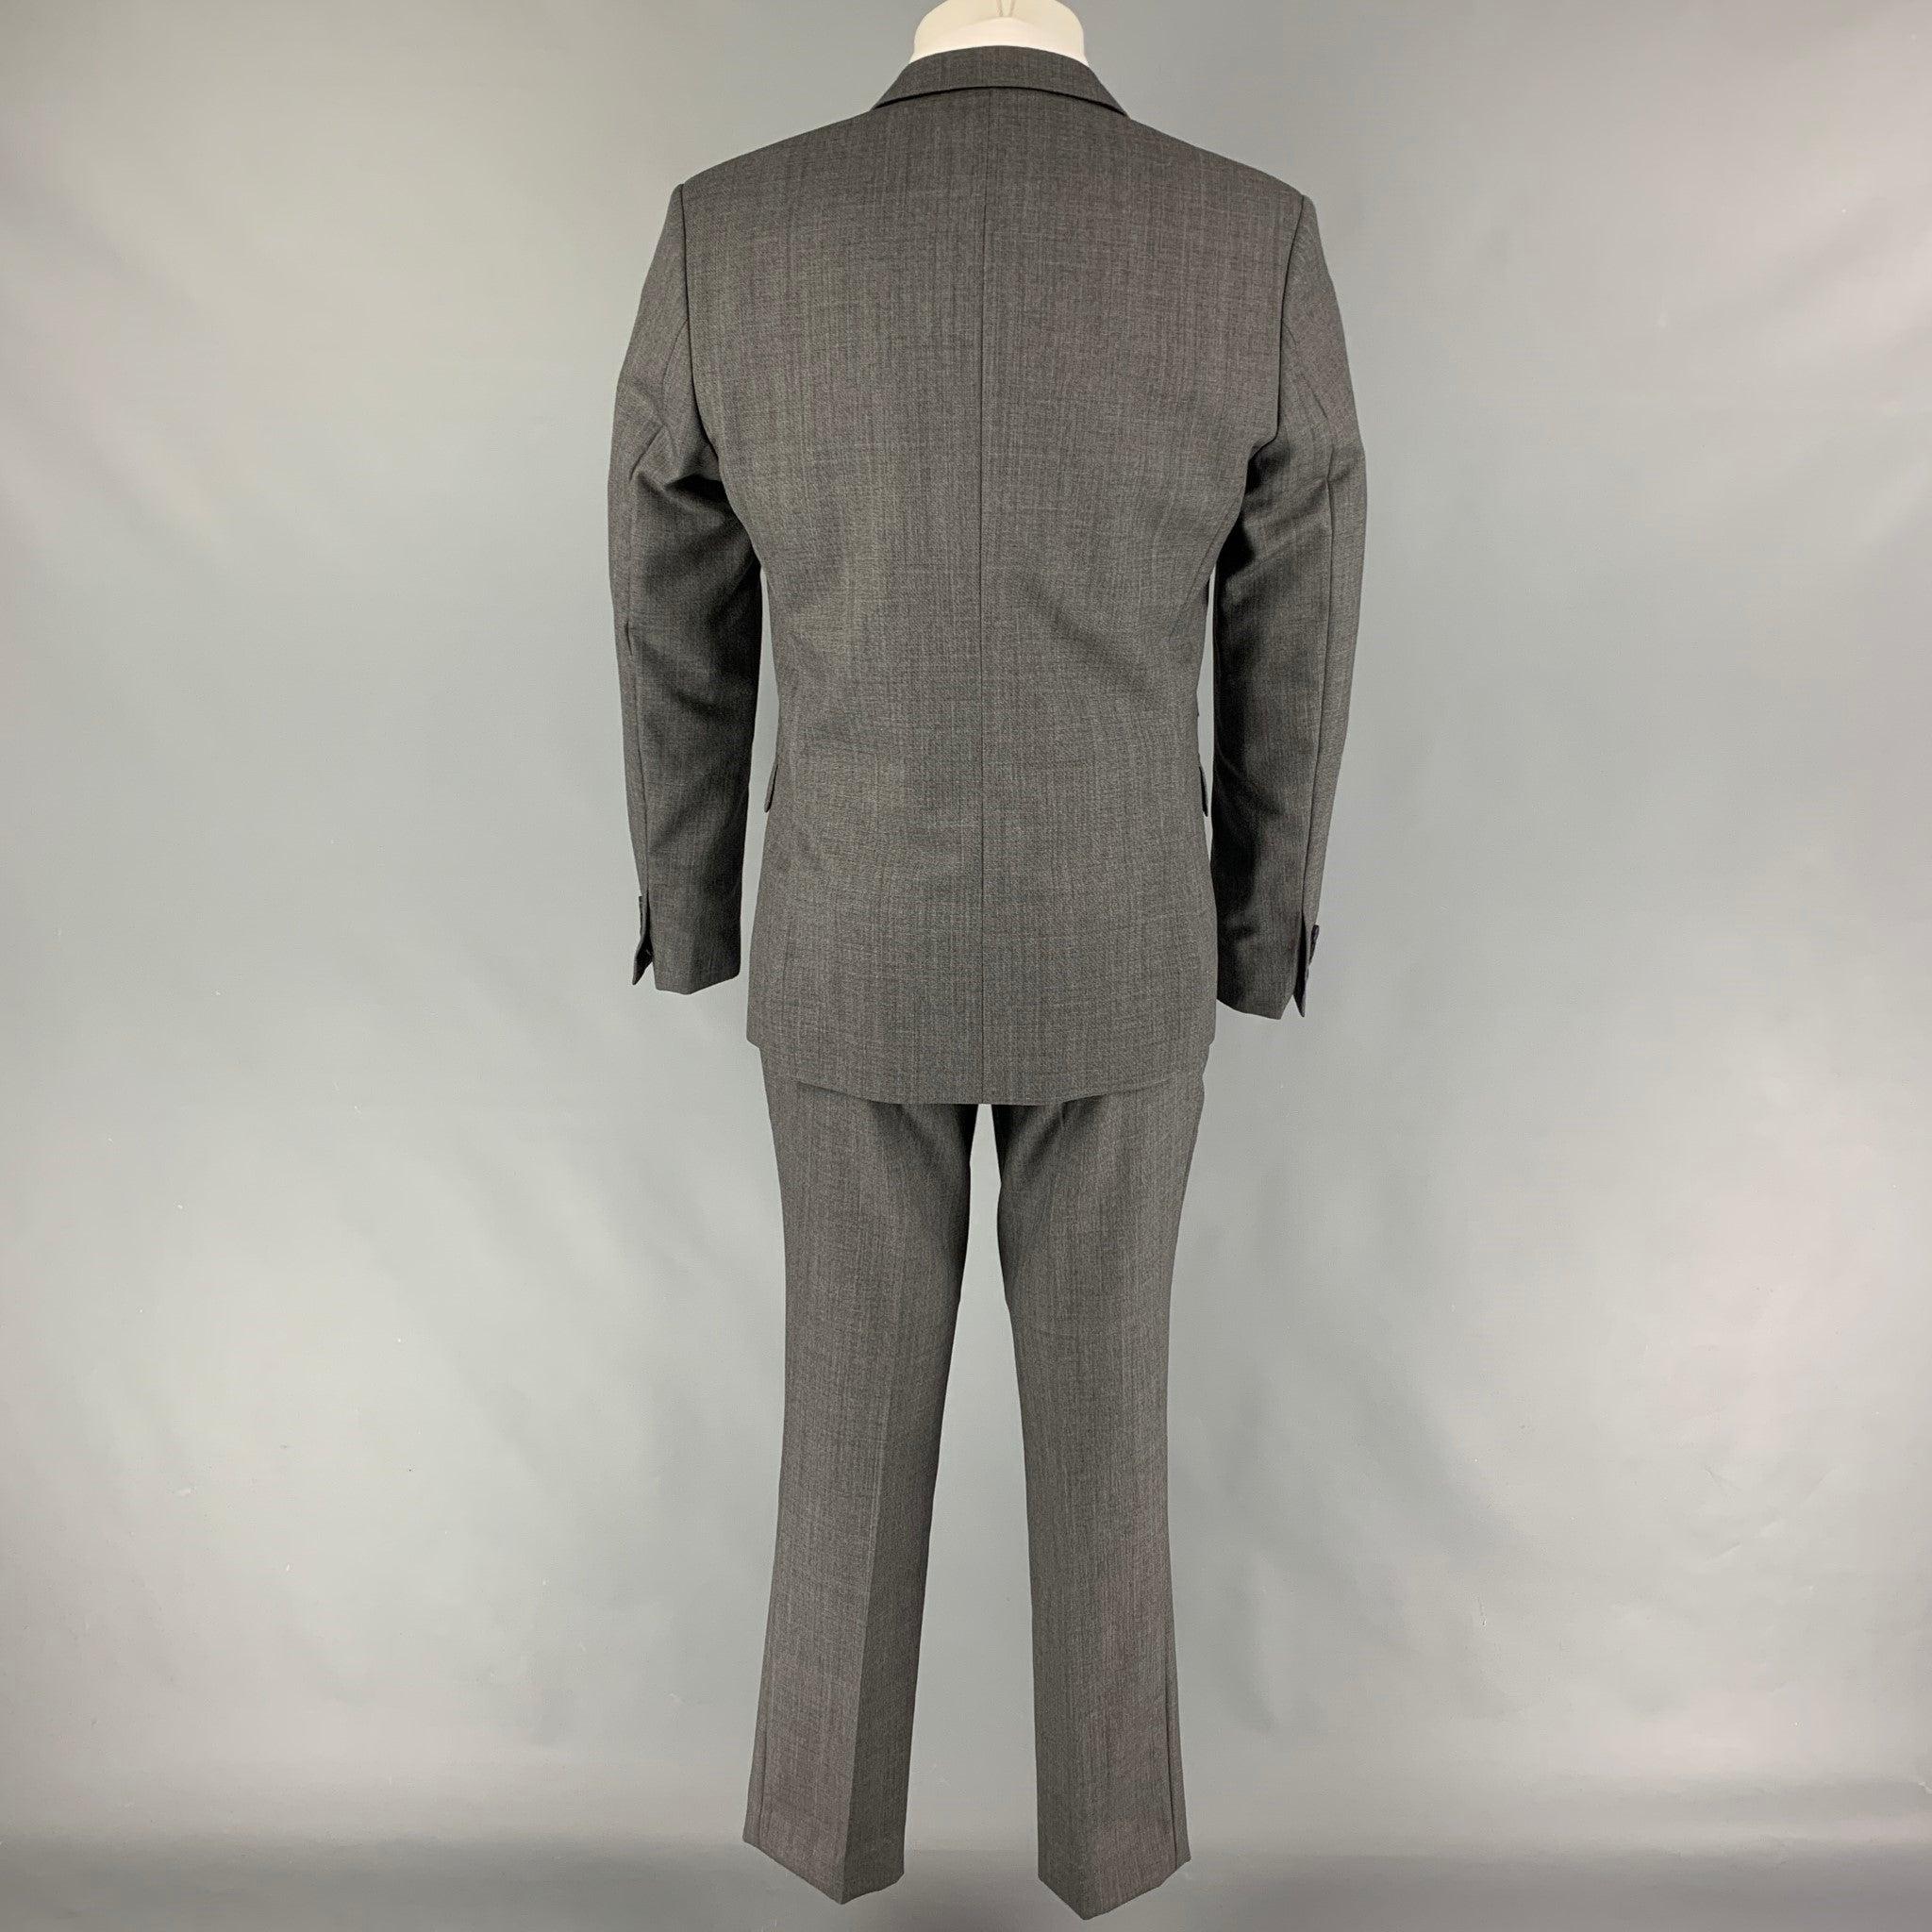 THE KOOPLES Size 38 Dark Gray Wool Peak Lapel Suit In Good Condition For Sale In San Francisco, CA